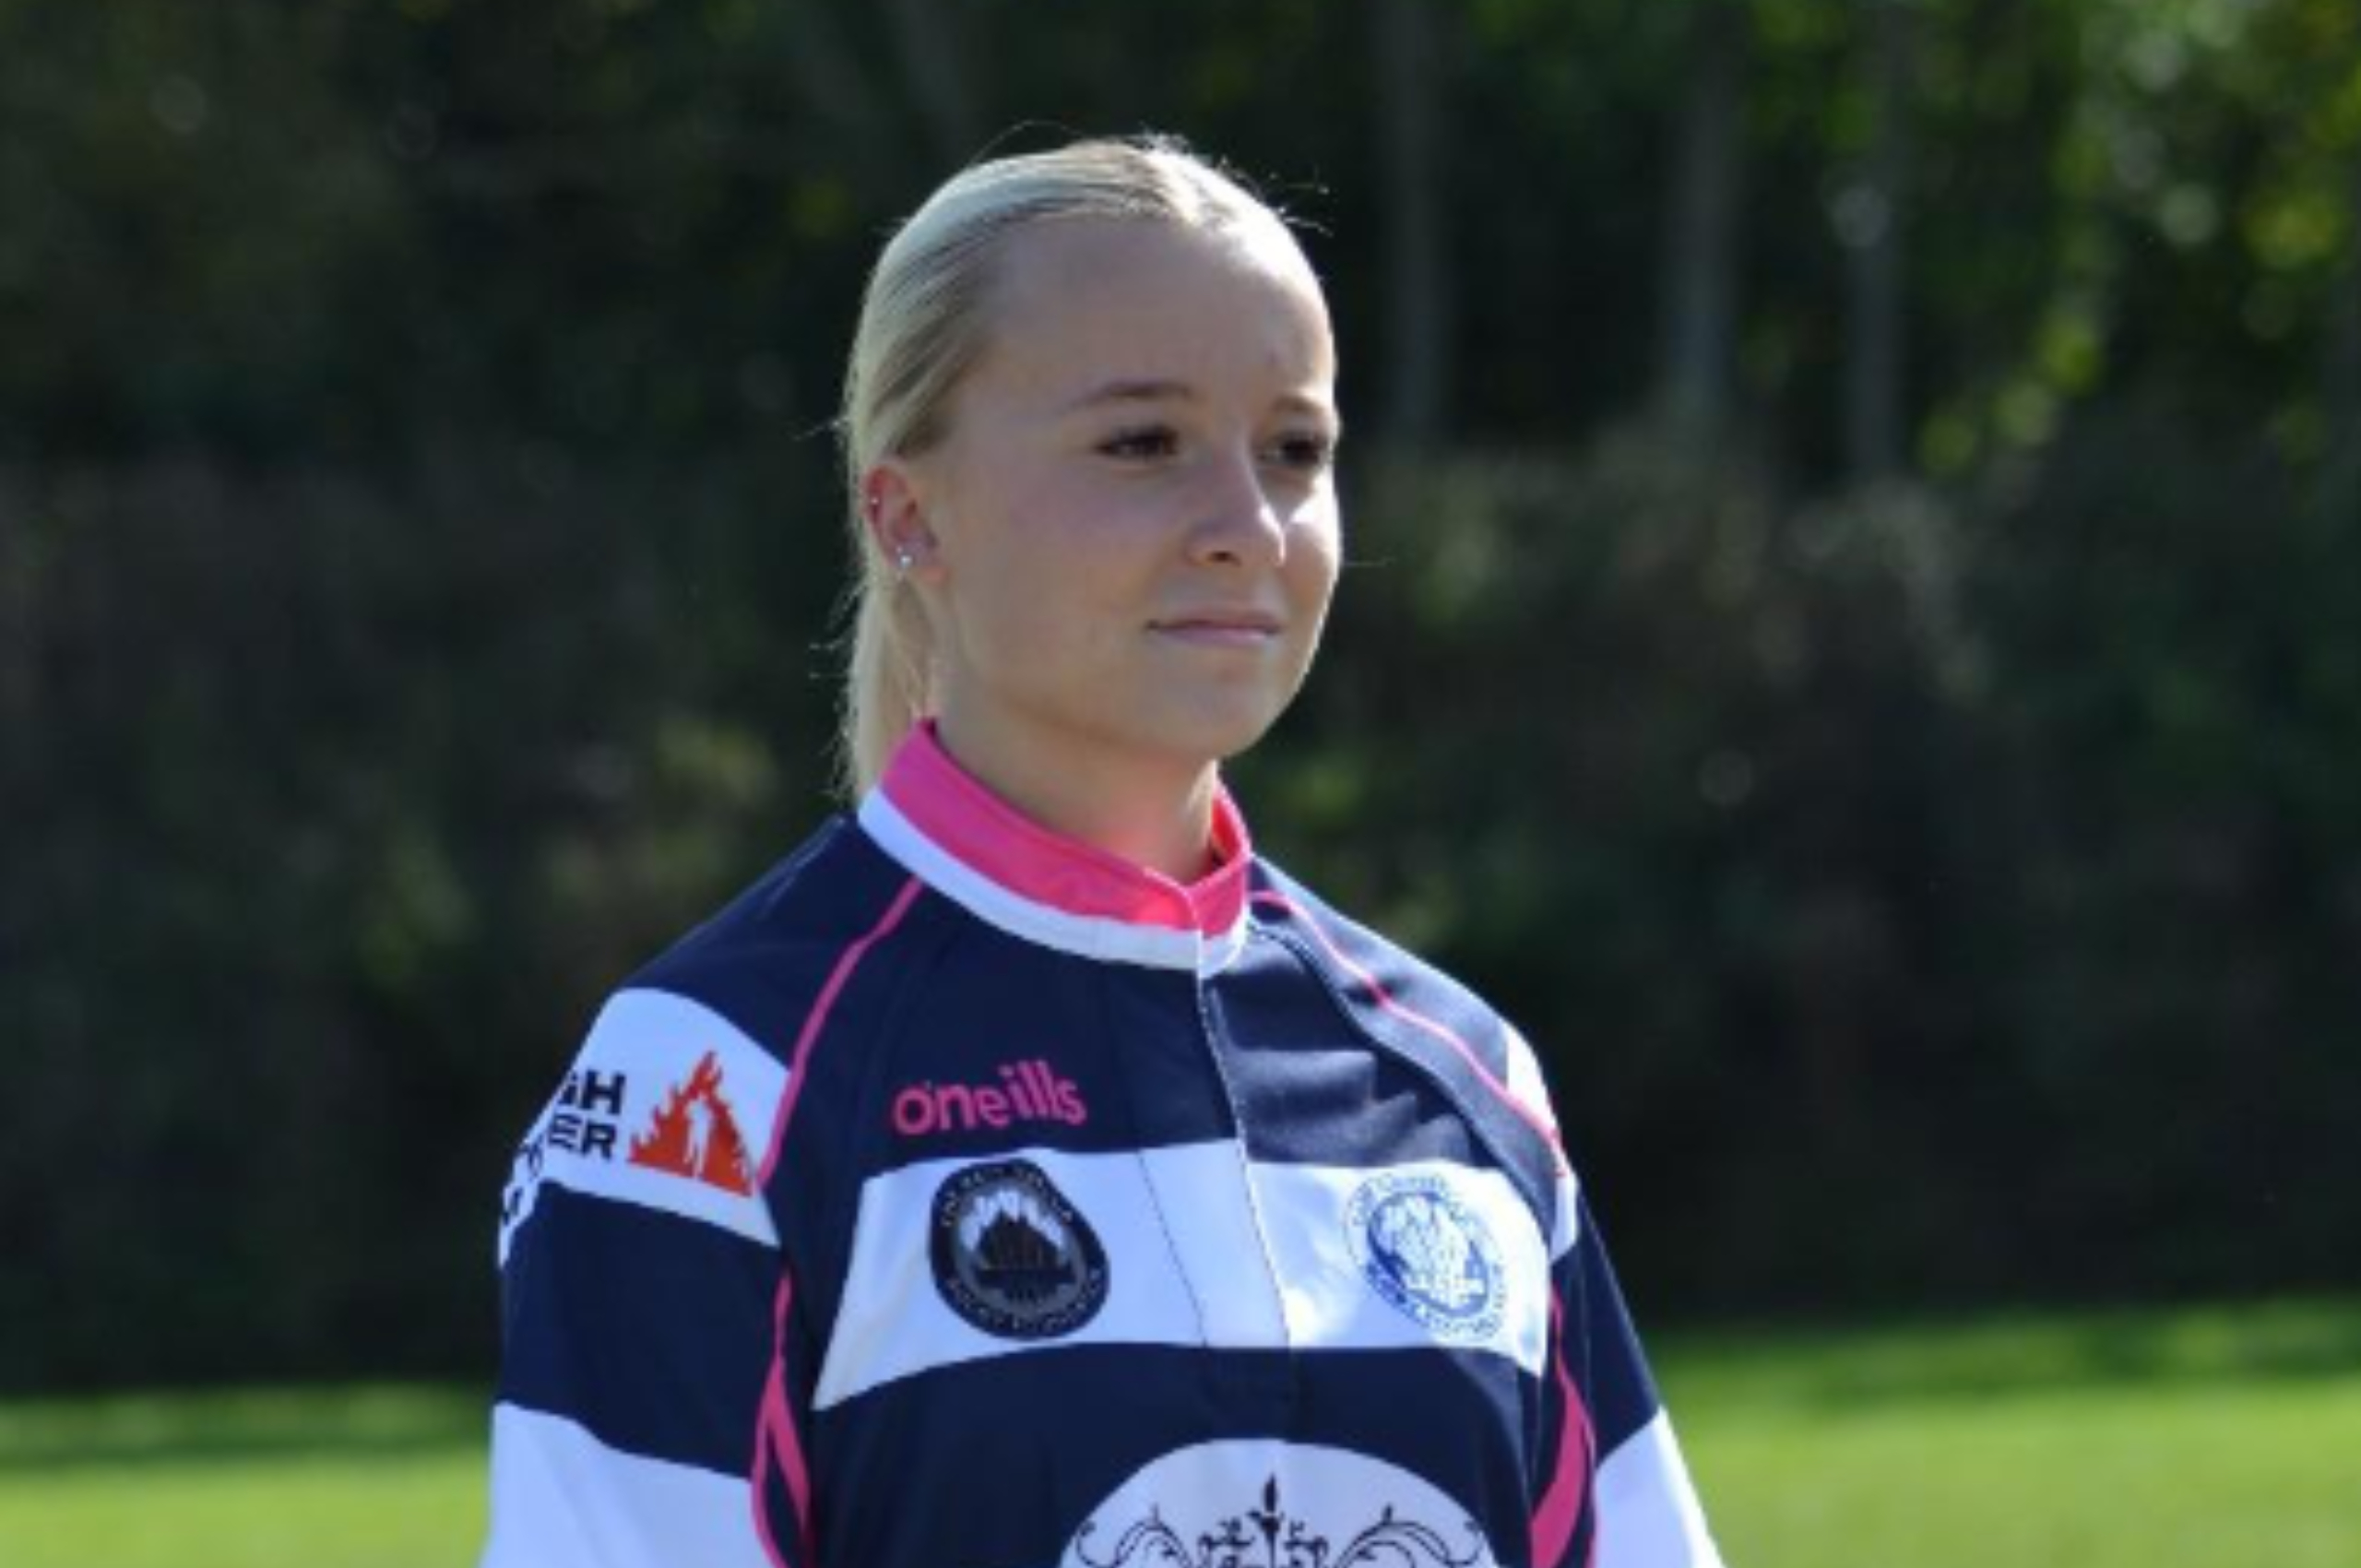 A girl wears a striped rugby shirt with the Barwells Wealth logo on the front.